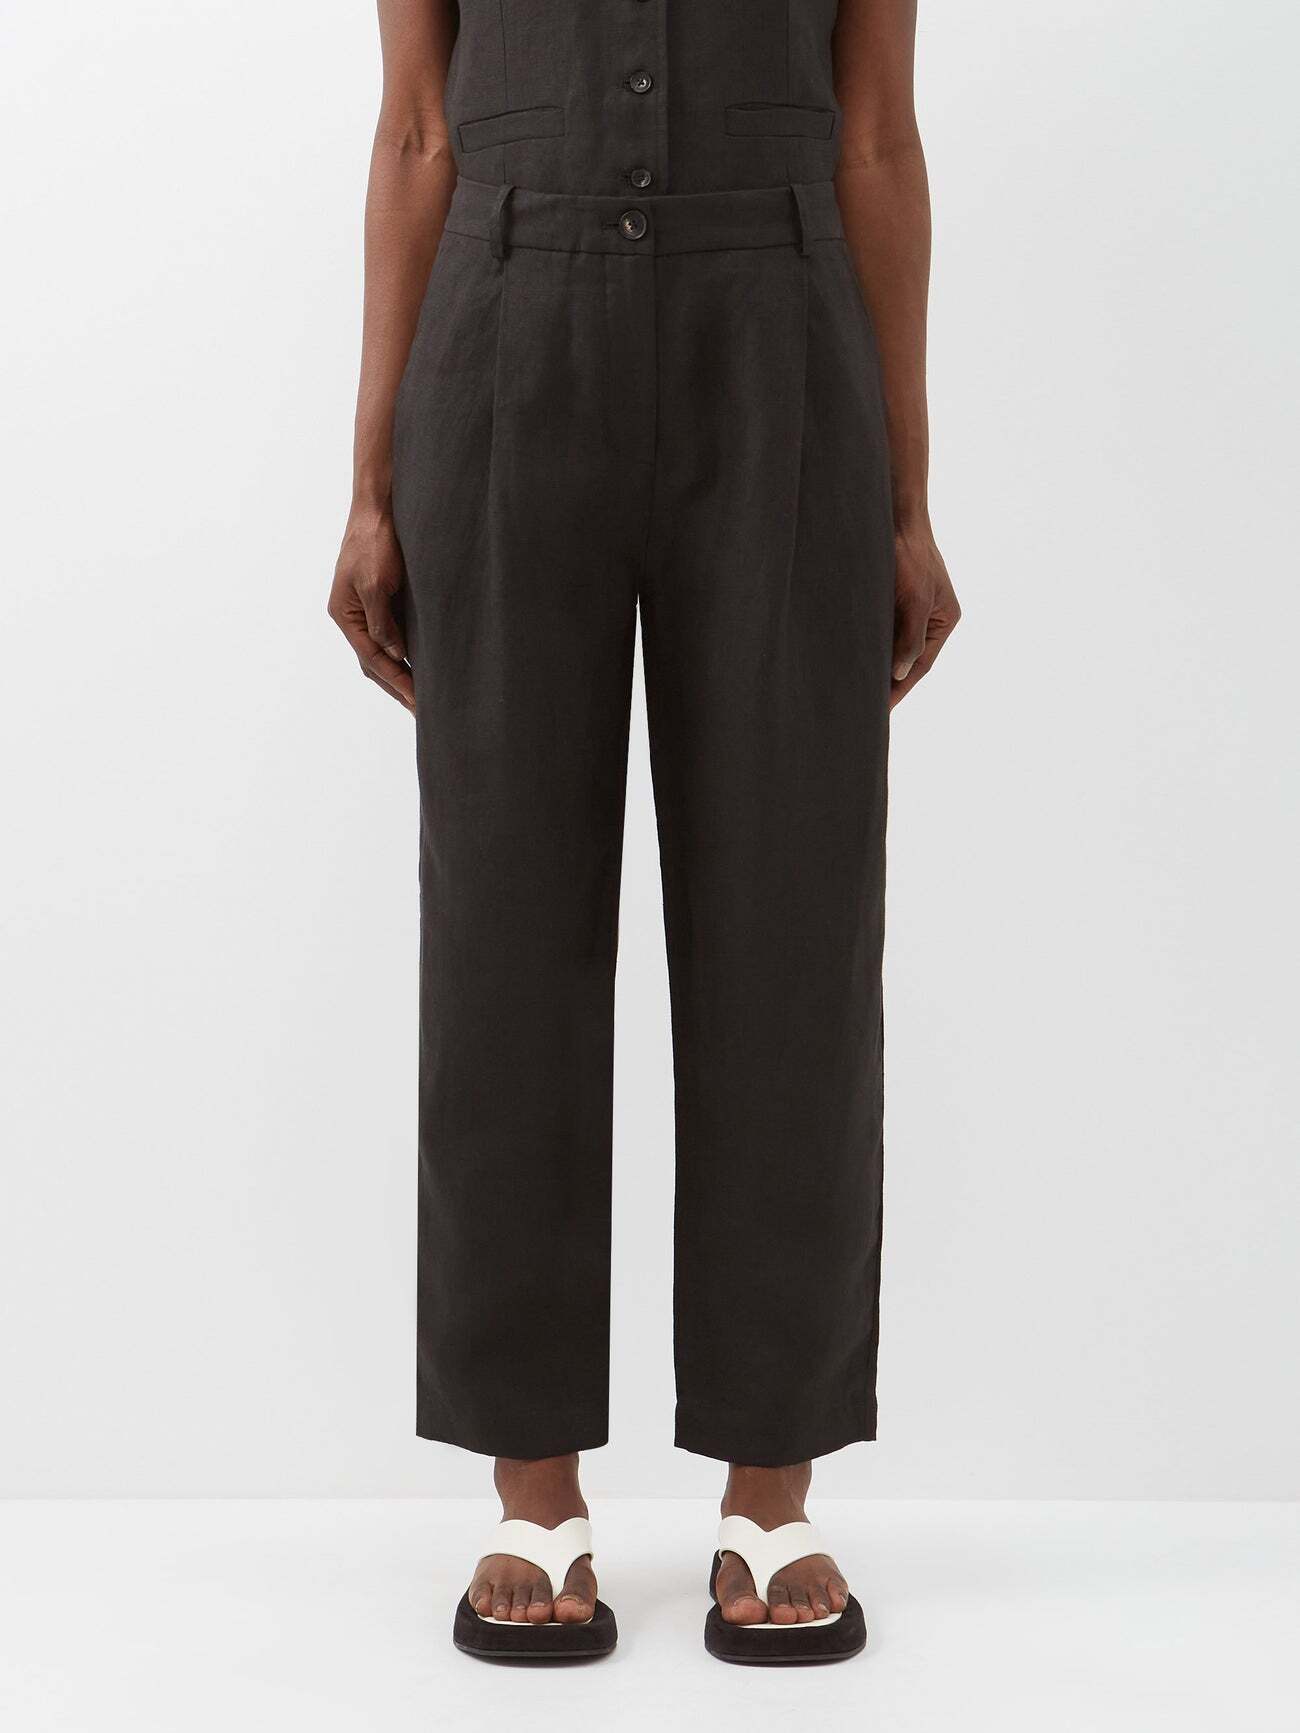 Co - Cropped Linen-blend Trousers - Womens - Black